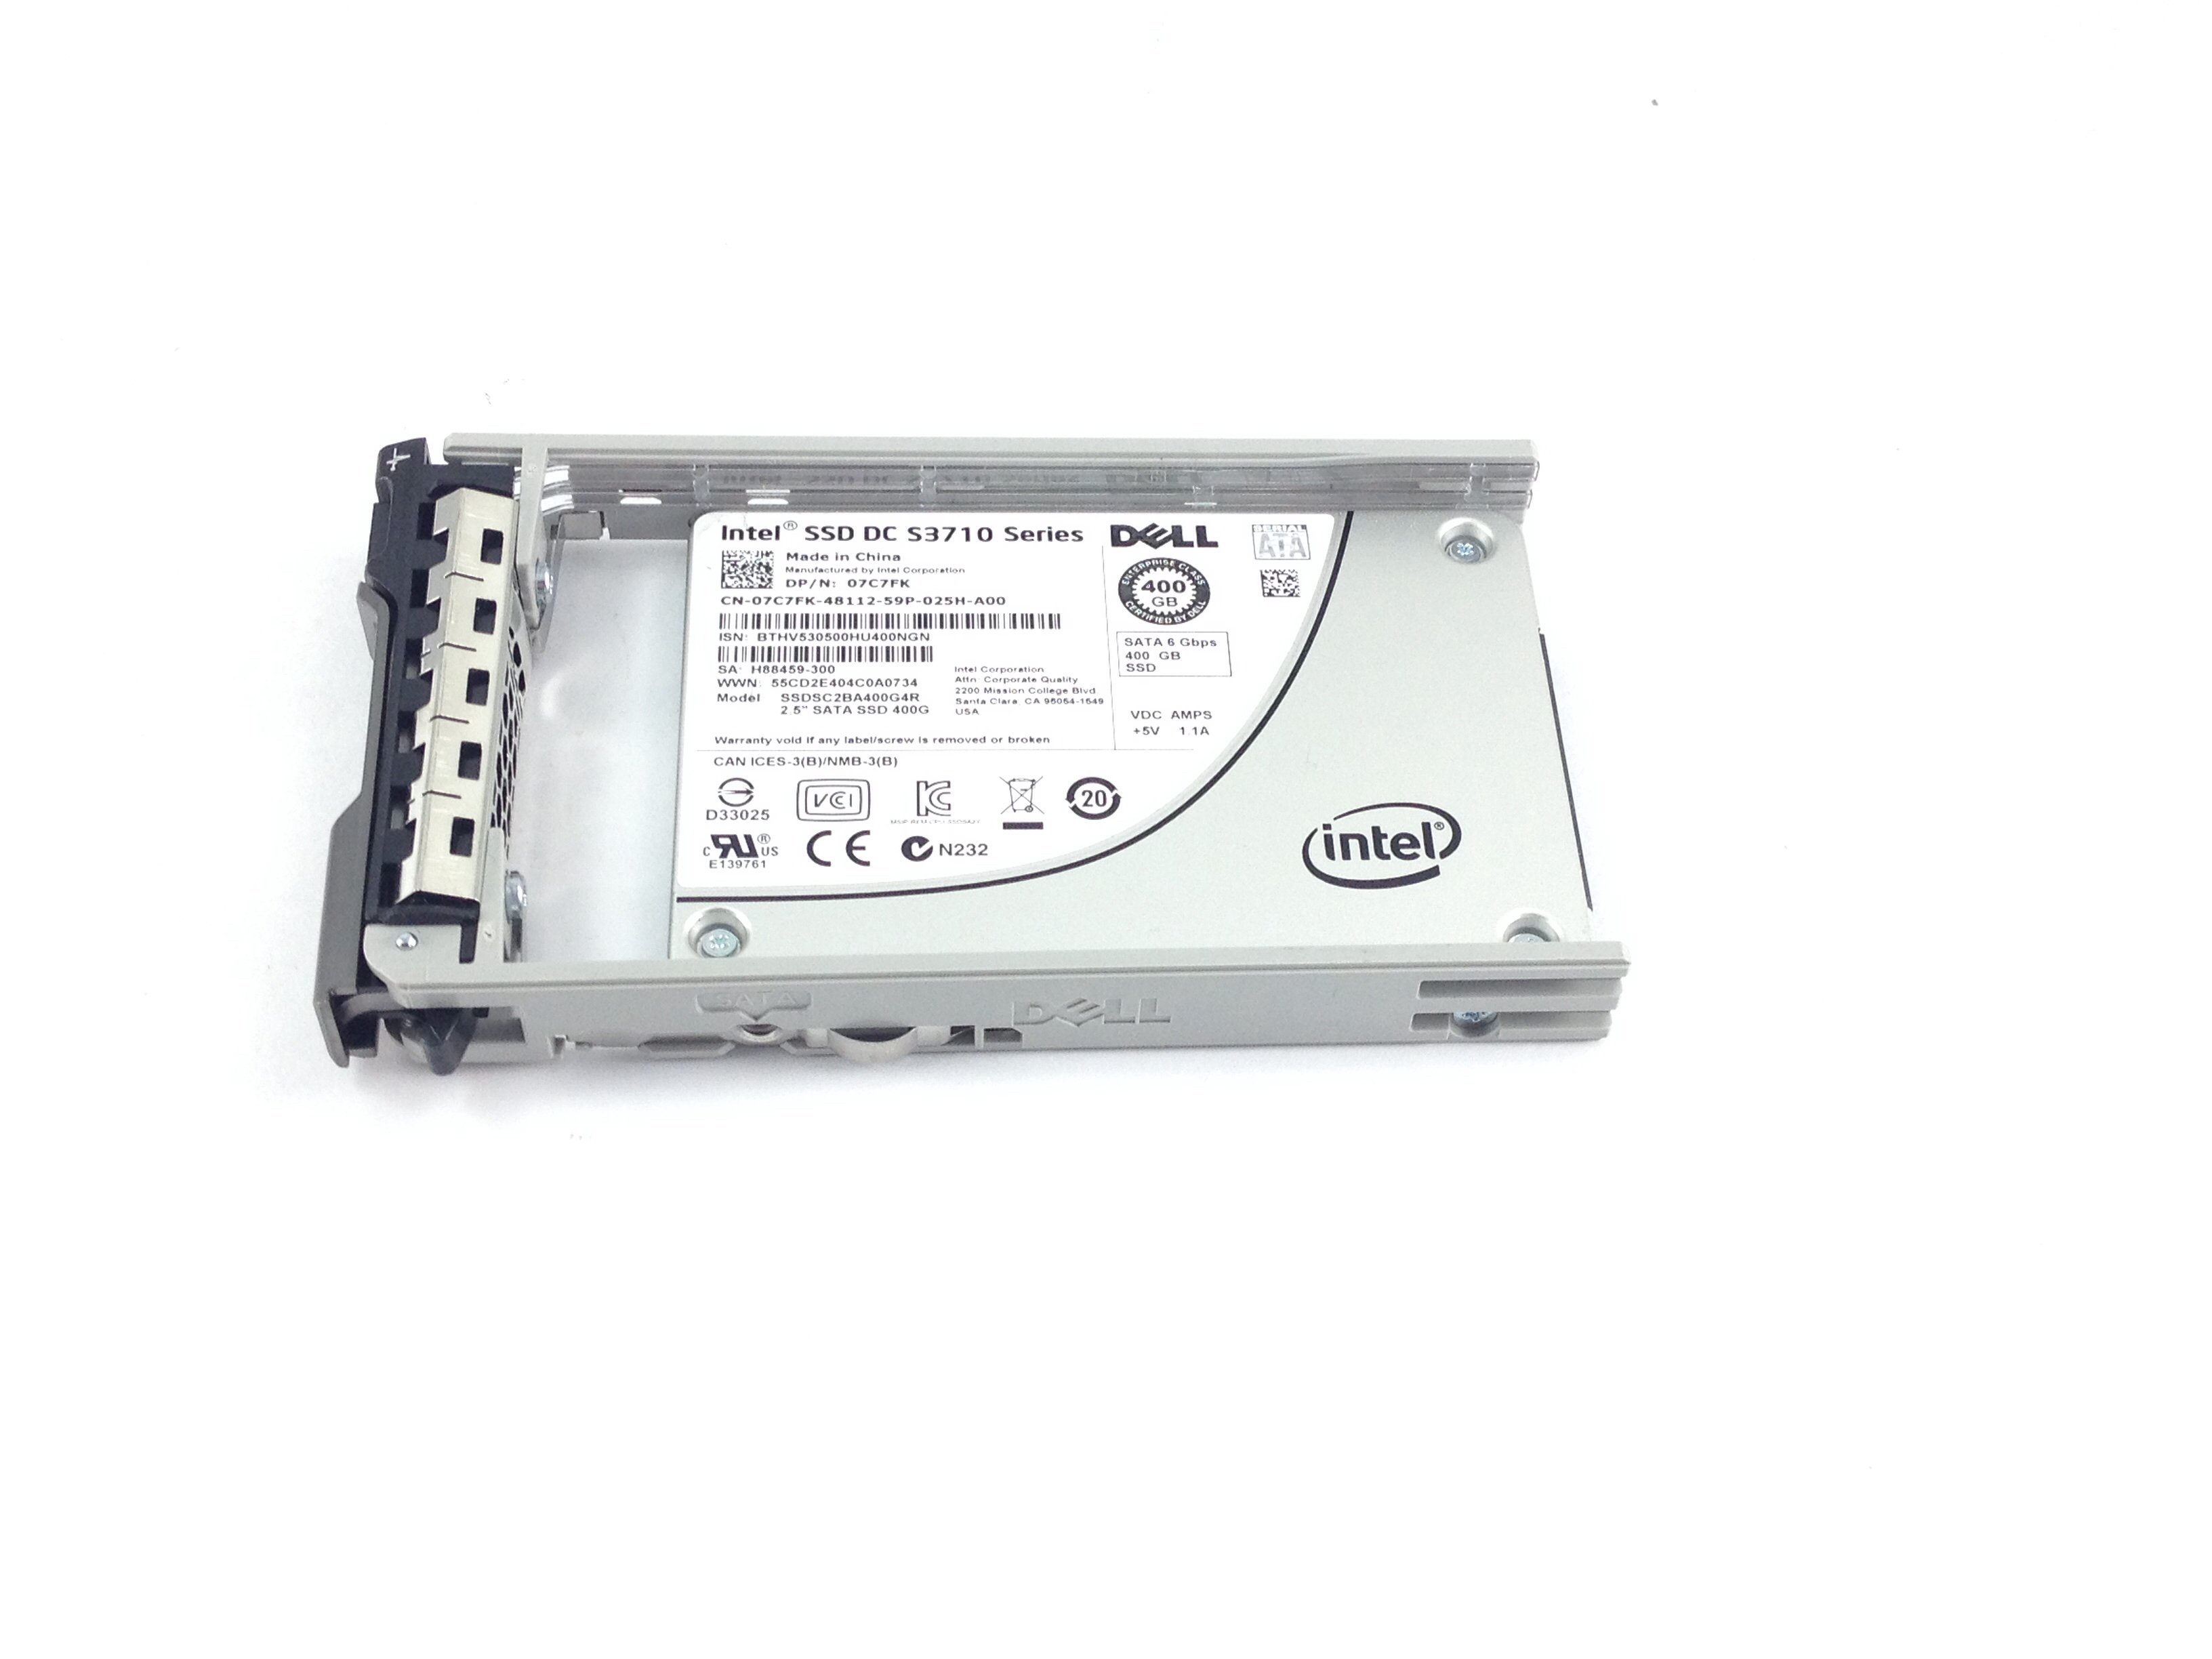 Dell Intel SSD DC S3710 400GB 6Gbps SATA 2.5'' Solid State Drive (7C7FK)